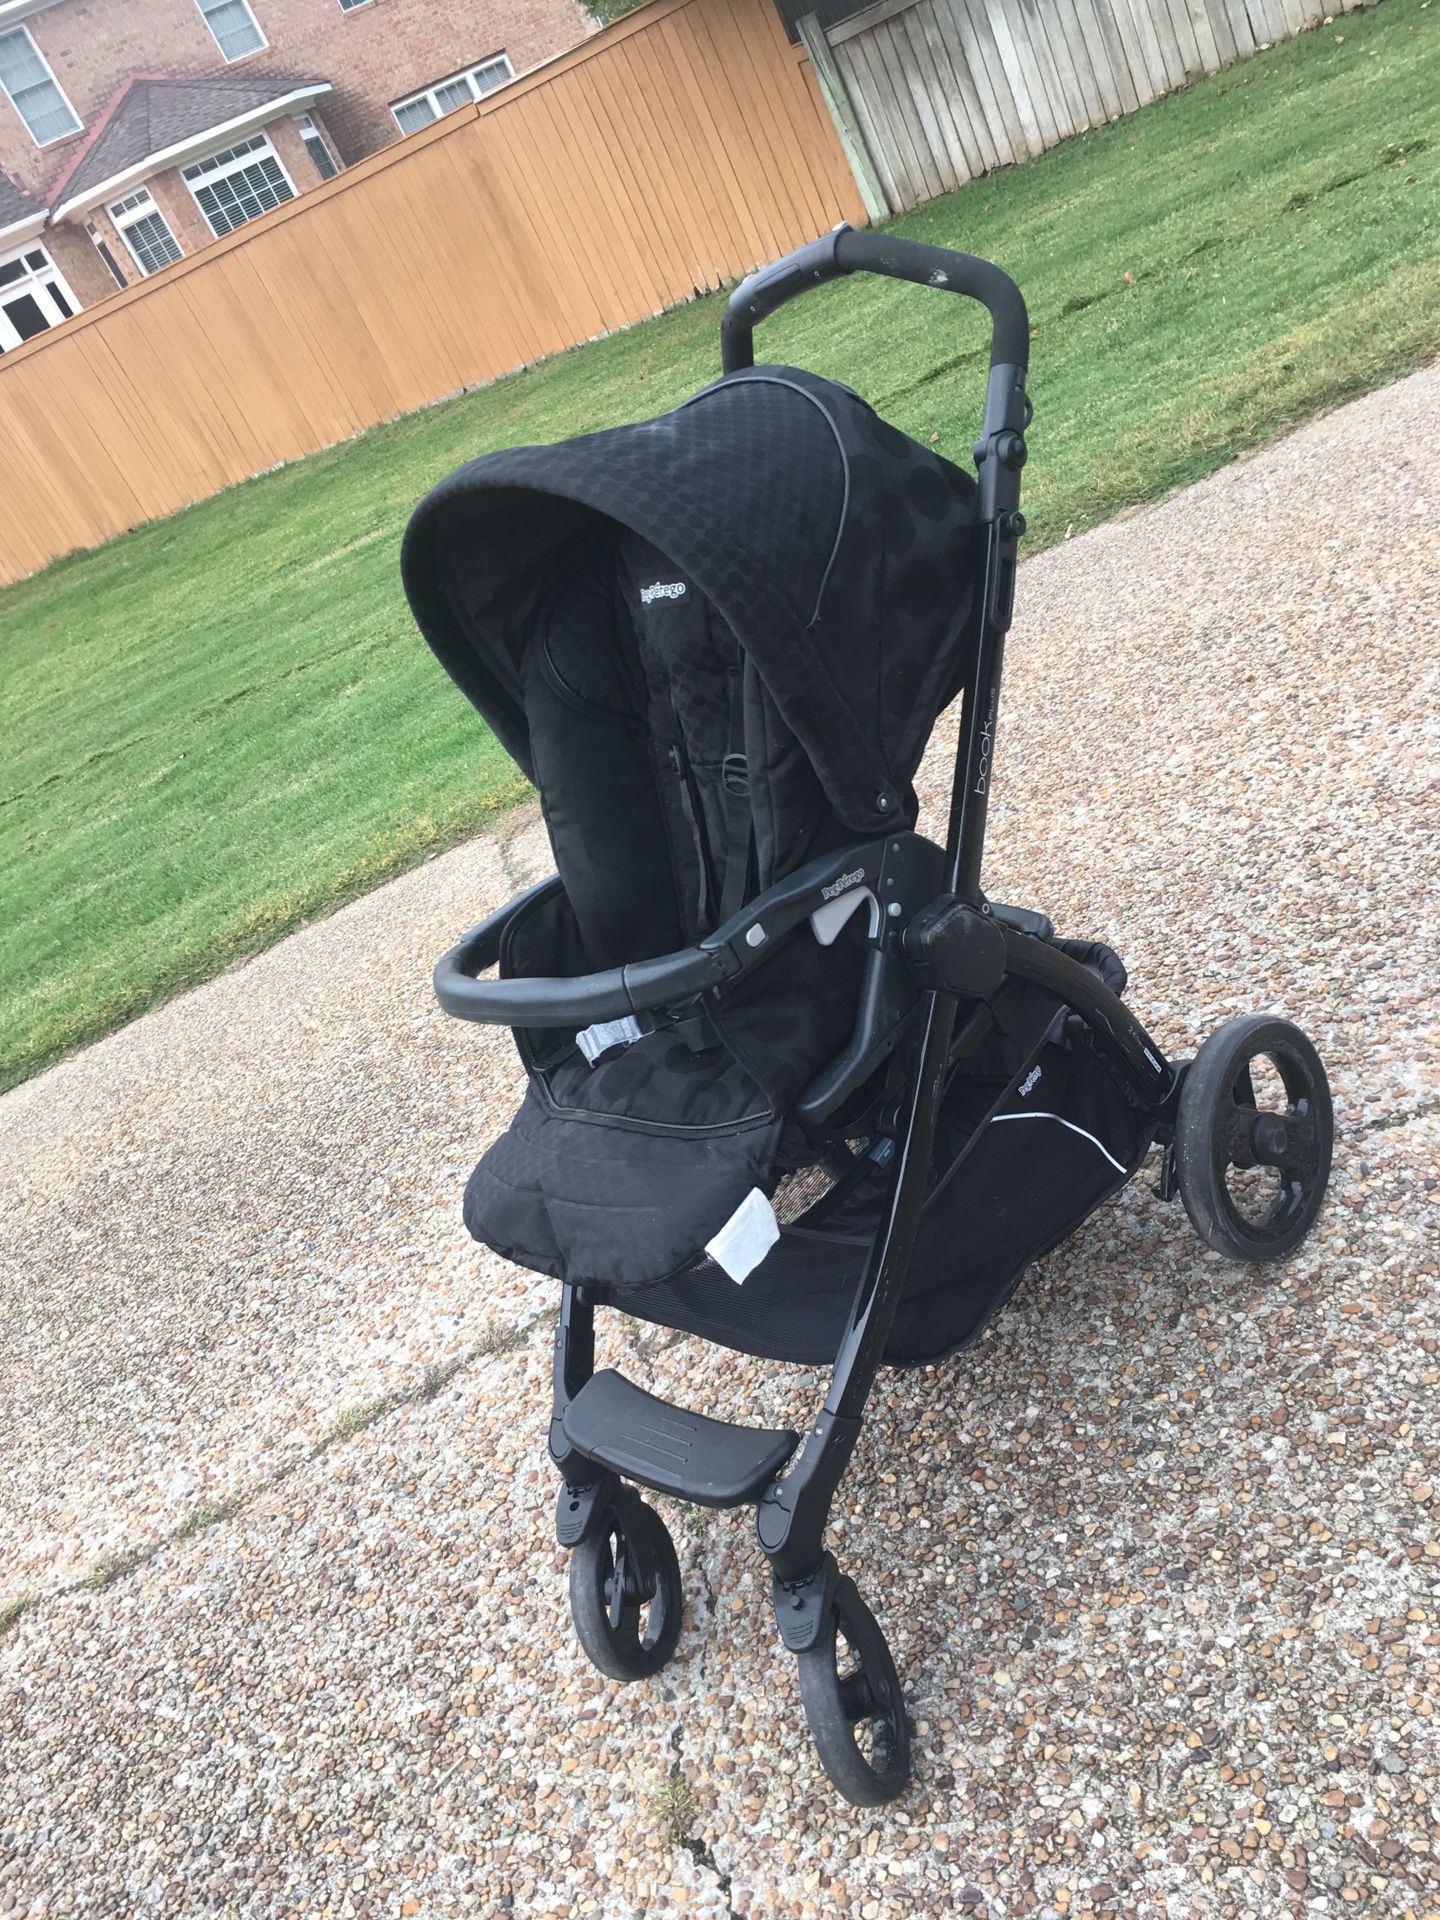 Peg perego book plus stroller with foot muff